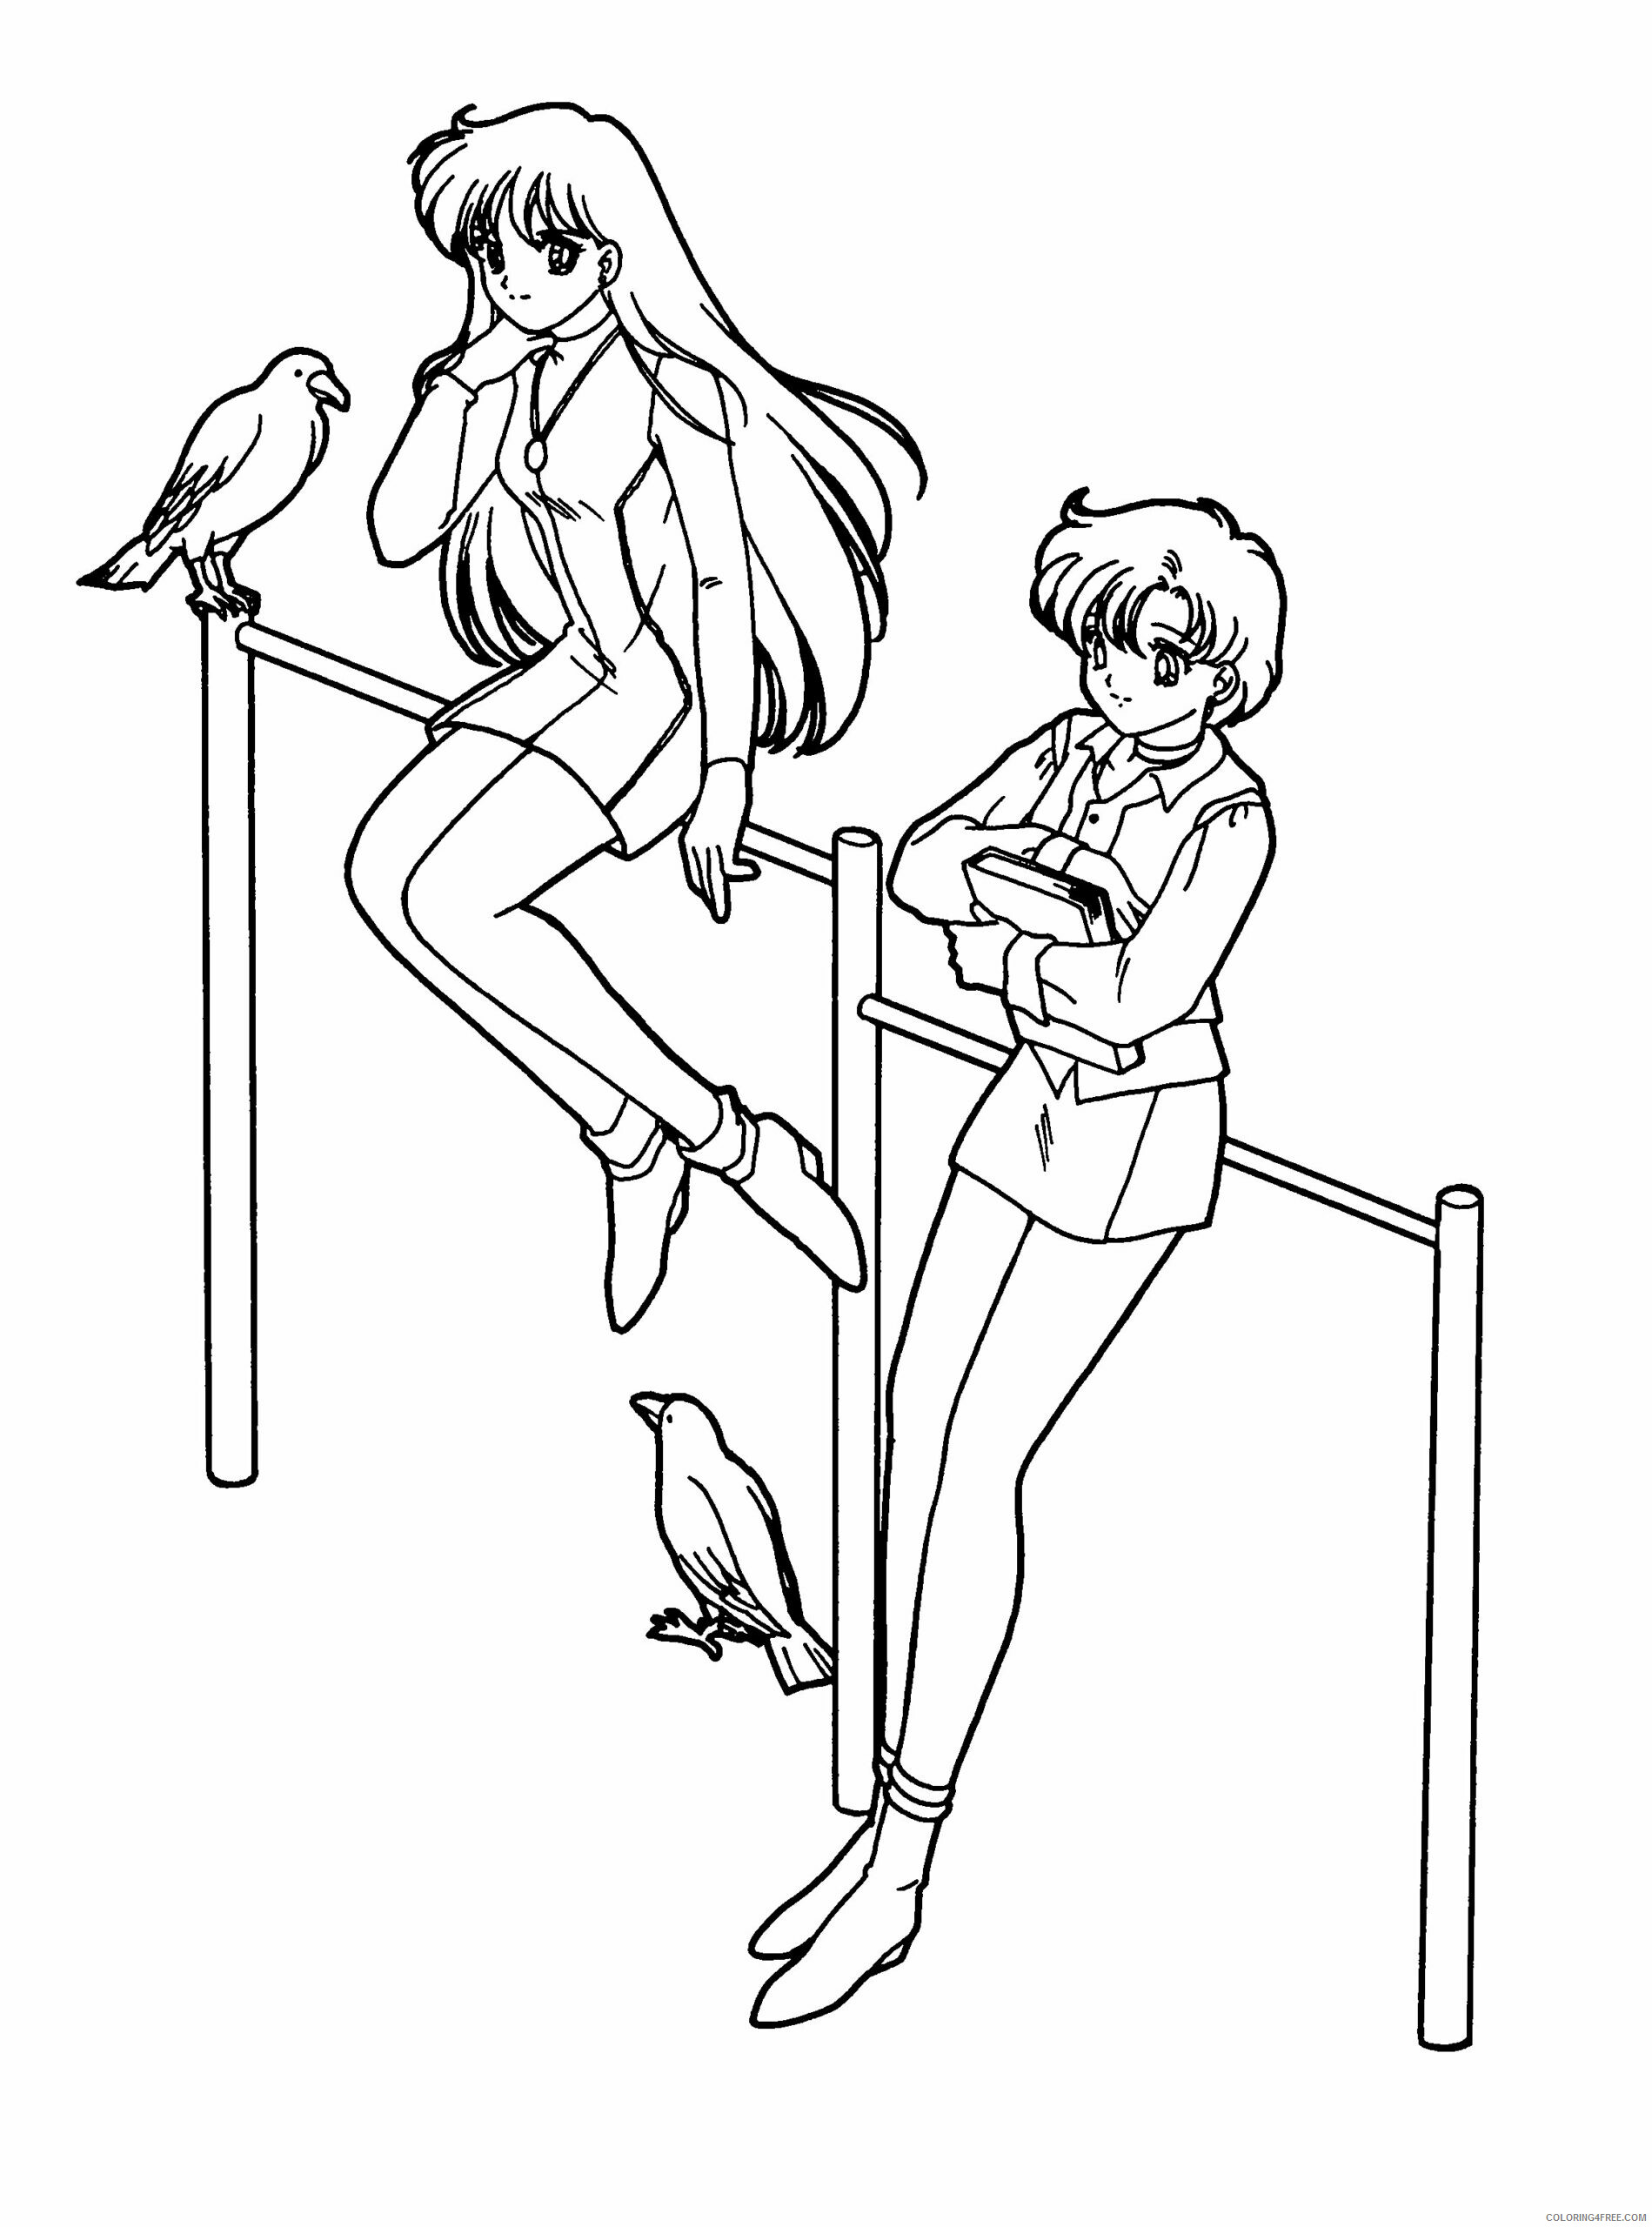 Sailor Moon Printable Coloring Pages Anime sailormoon cCBef 2021 0985 Coloring4free